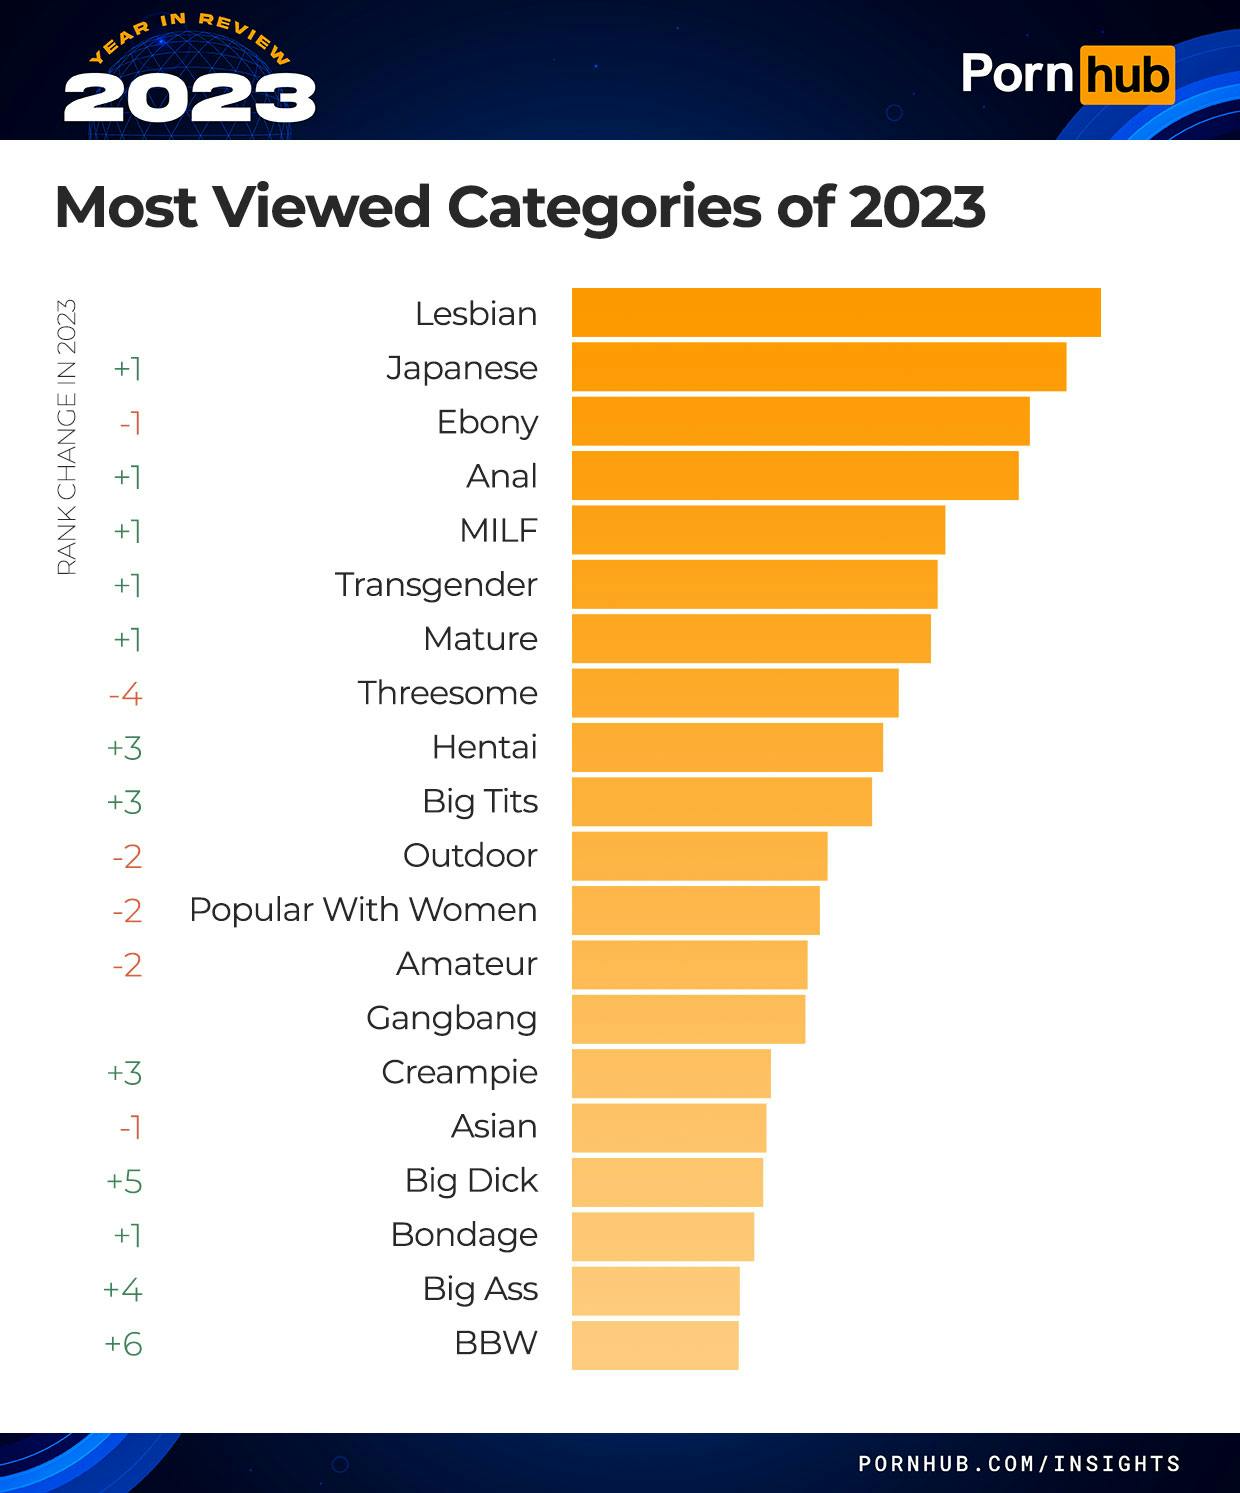 https://imgix.seoghoer.dk/2023-12-18/pornhub-insights-2023-year-in-review-most-viewed-categories-2.jpg